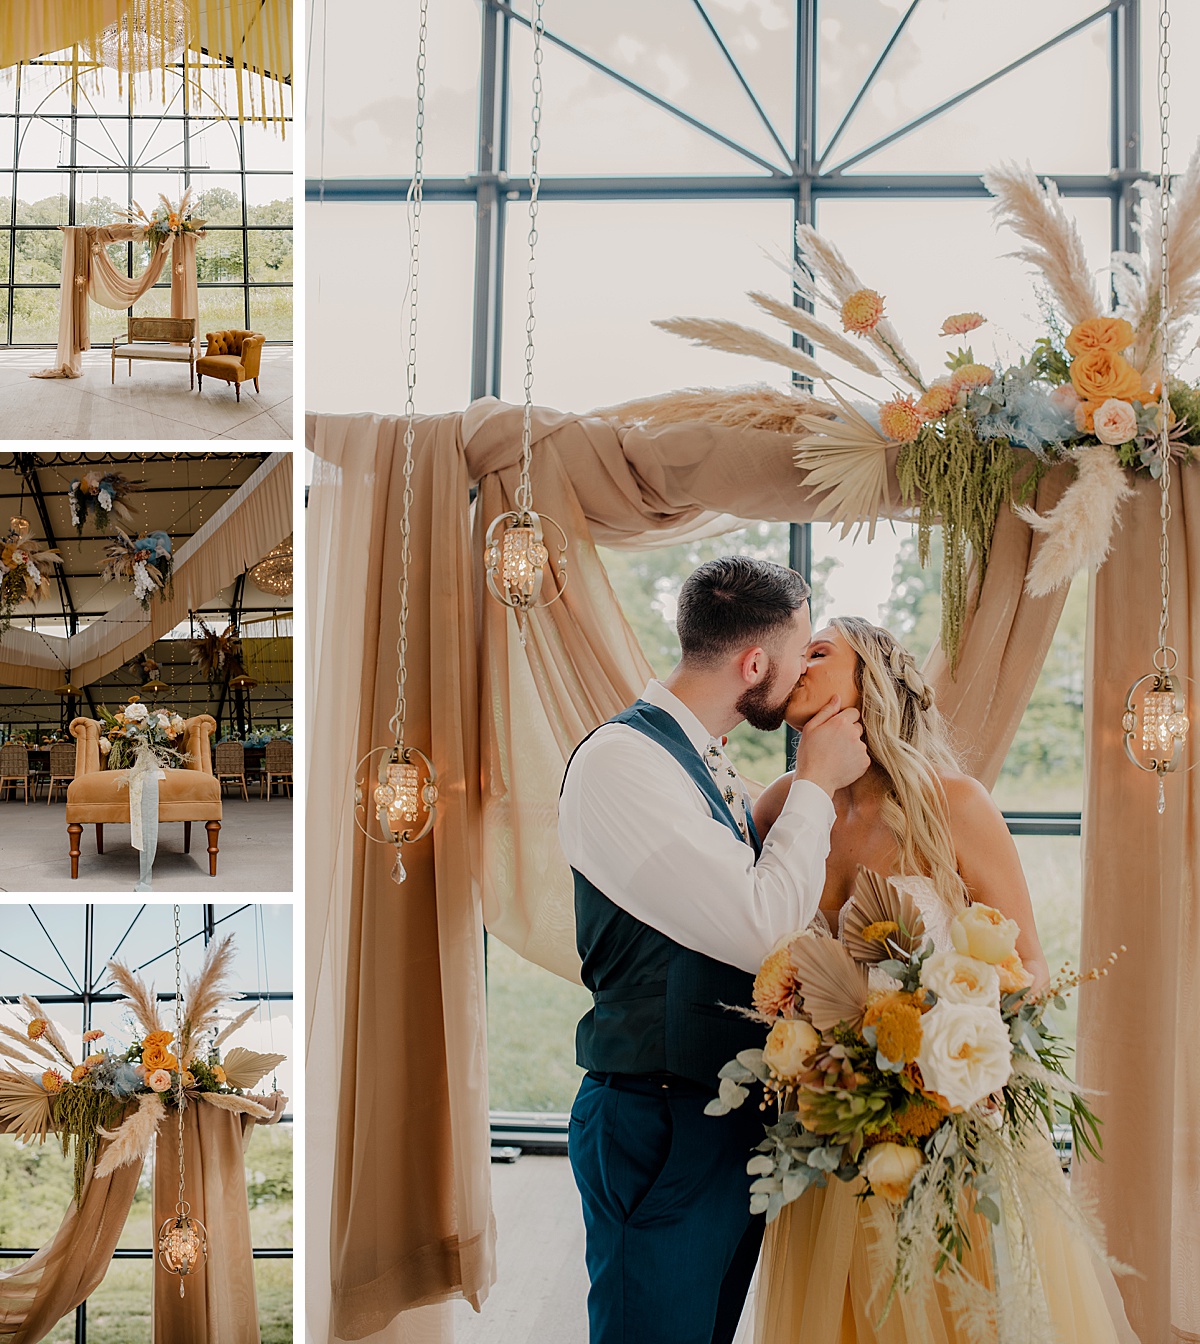 Colorful boho wedding ceremony backdrop with drapery from this styled branding shoot in Kansas City.